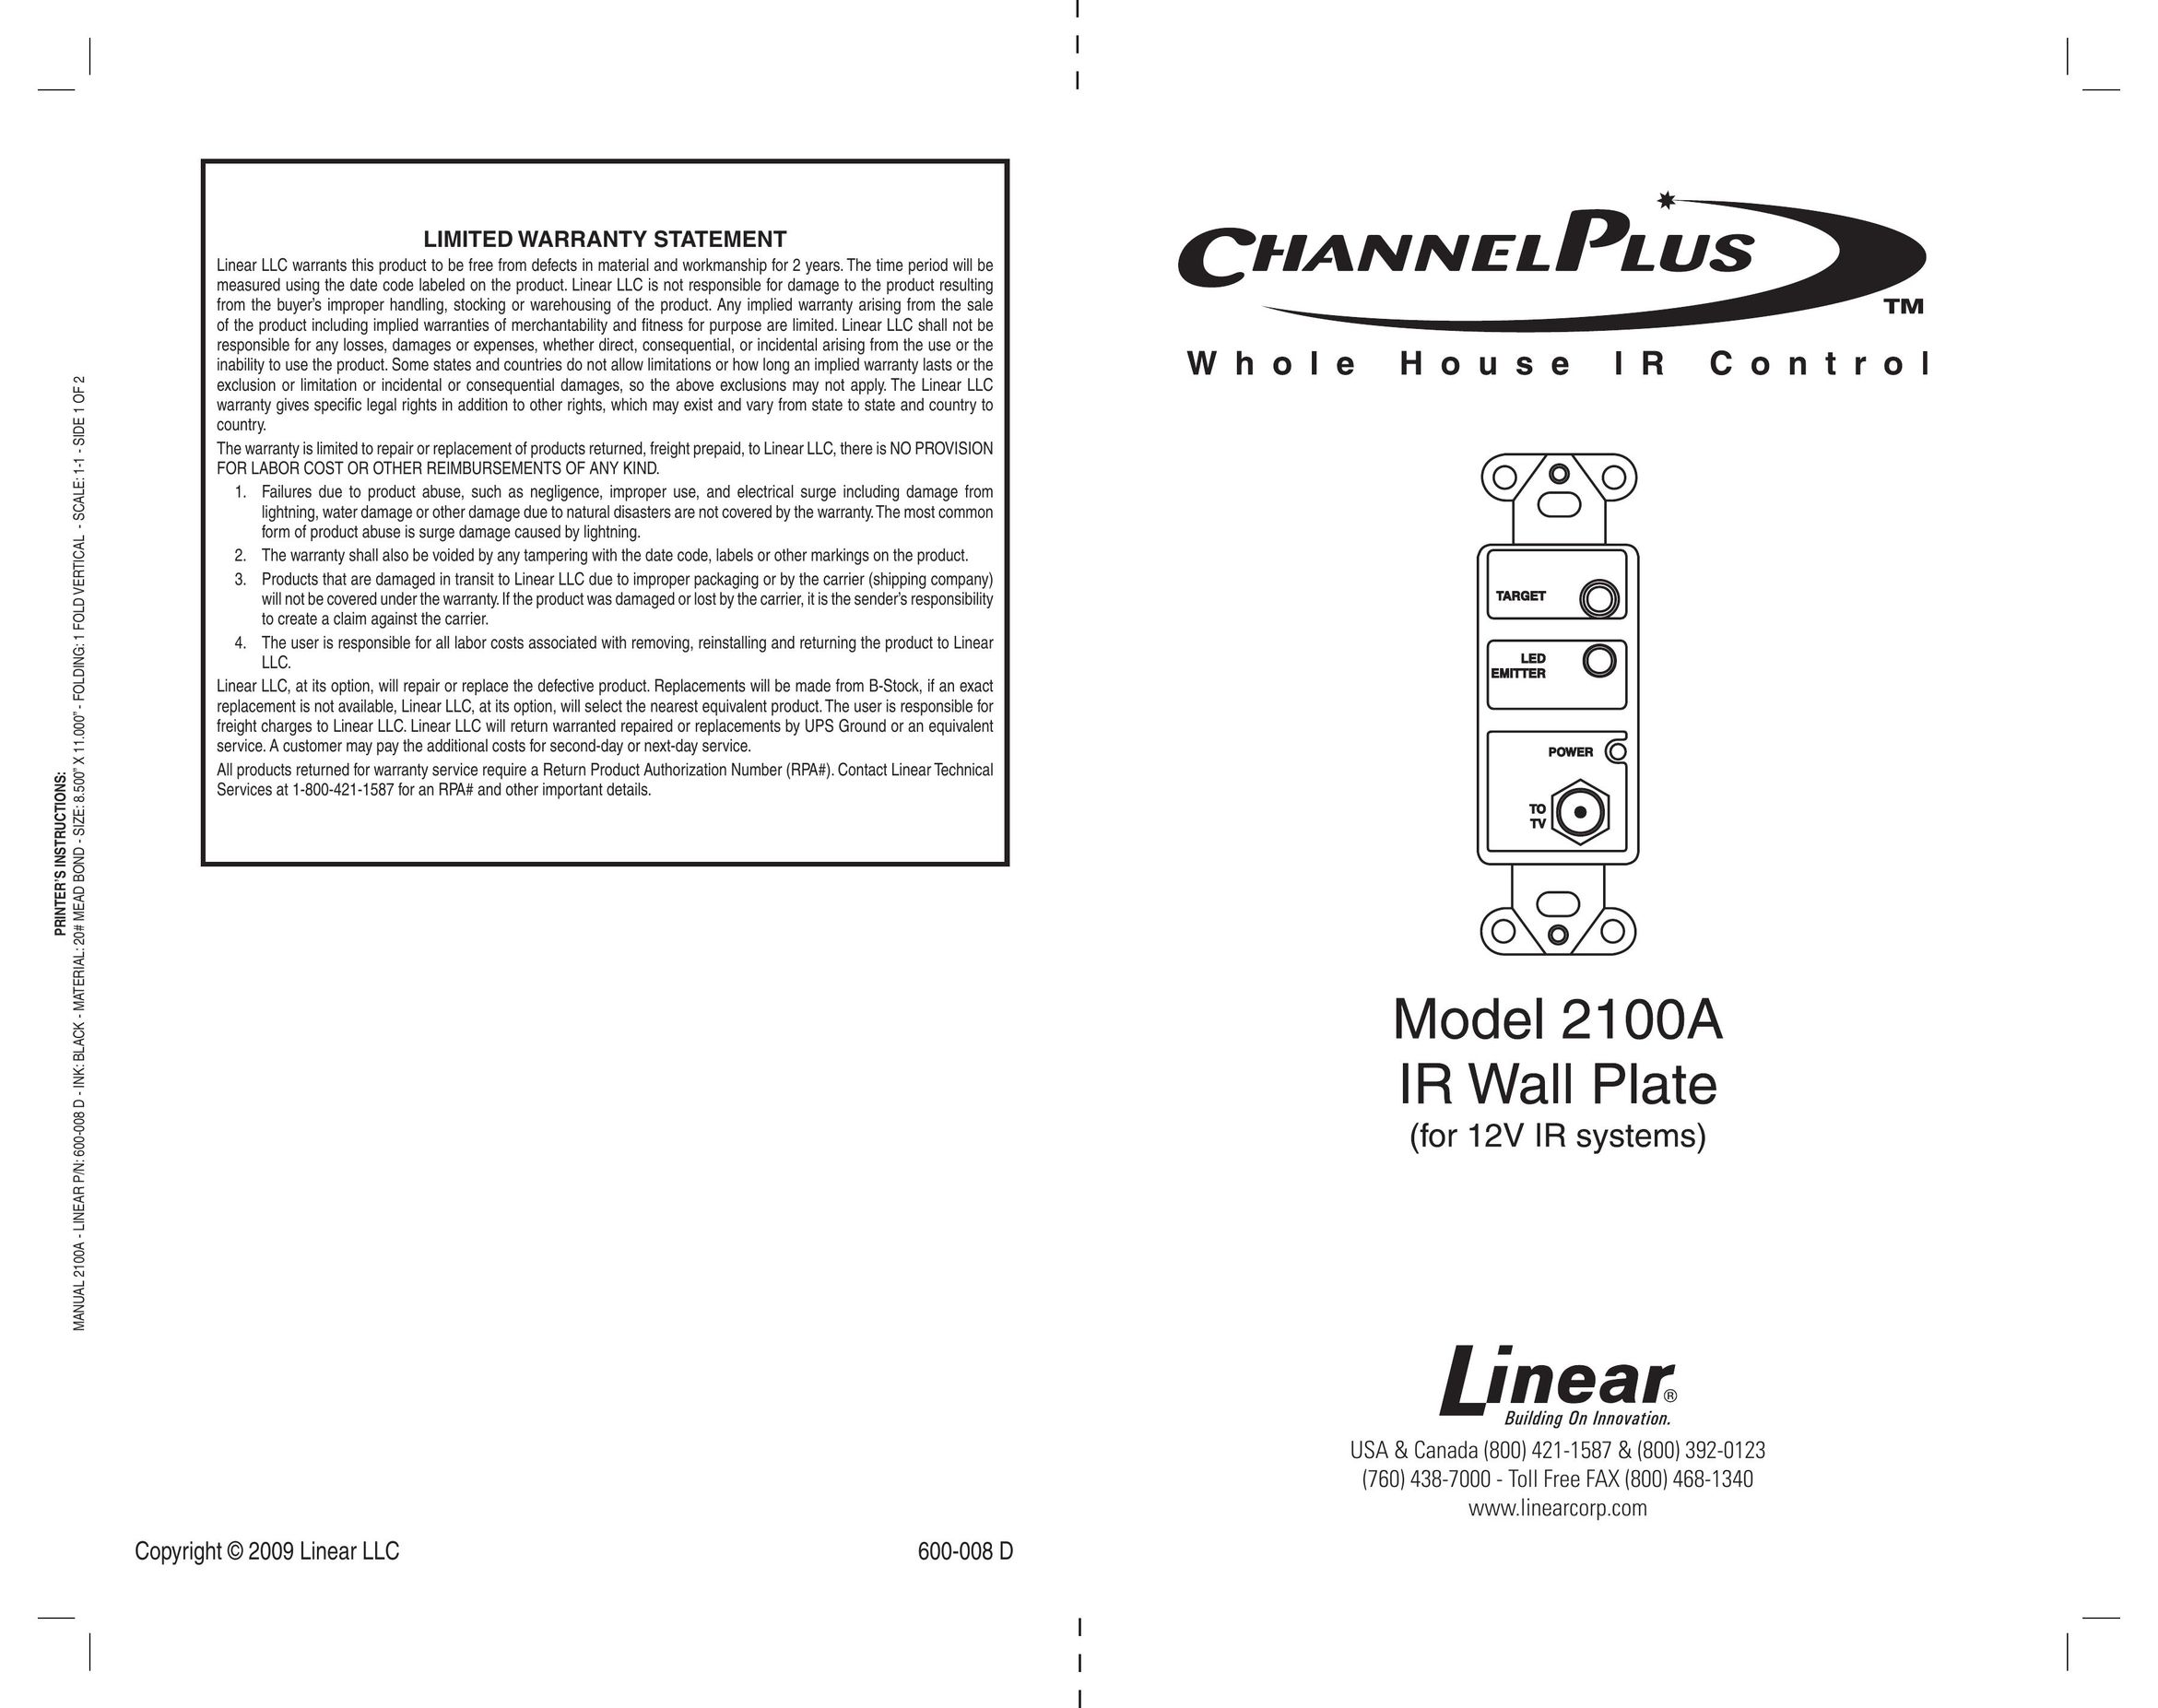 Linear 2100A Universal Remote User Manual